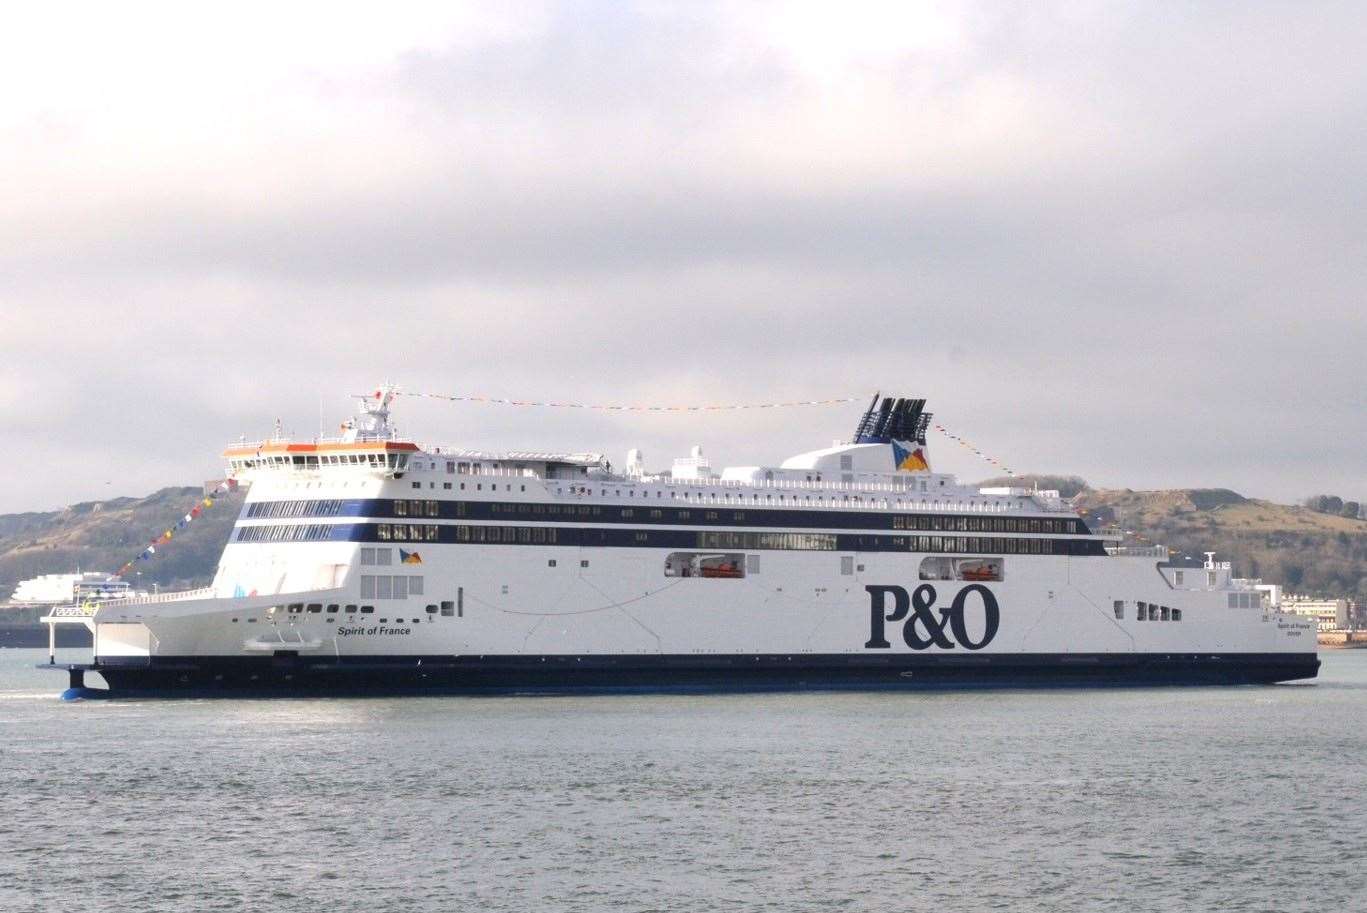 P&O Ferries have spoken of its confidence over avoiding fines for its mass sacking scandal last year